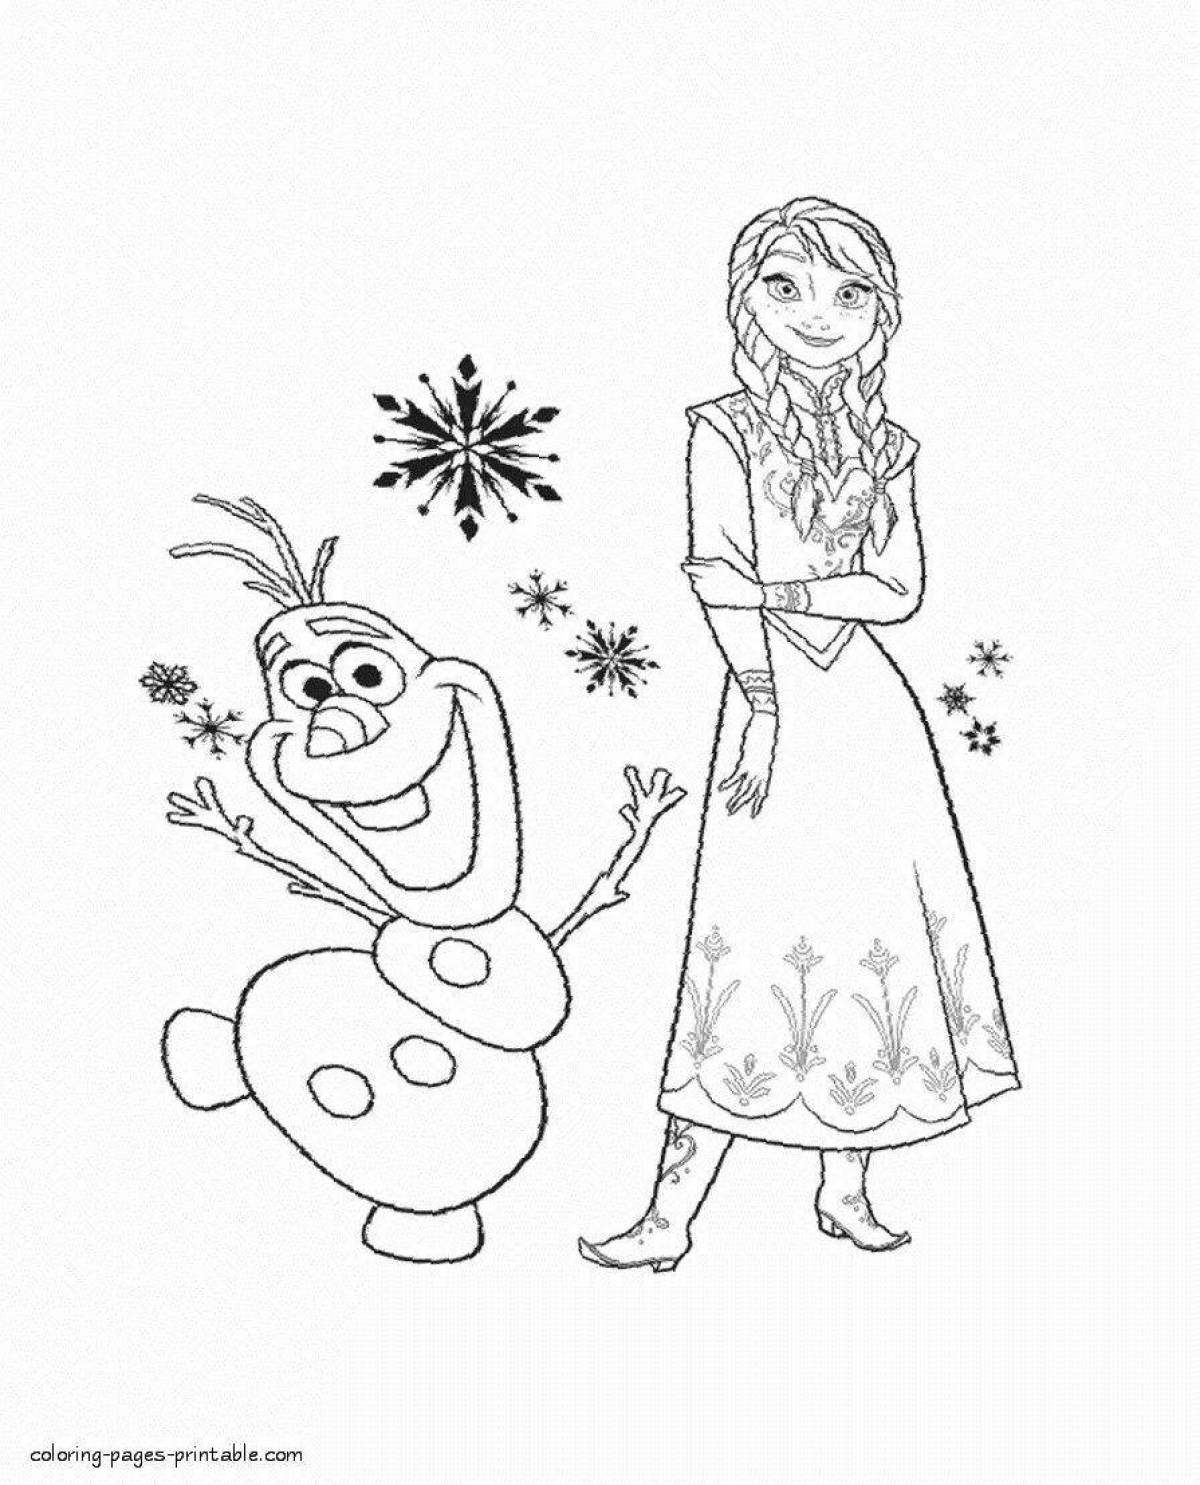 Serene coloring page elsa and olaf